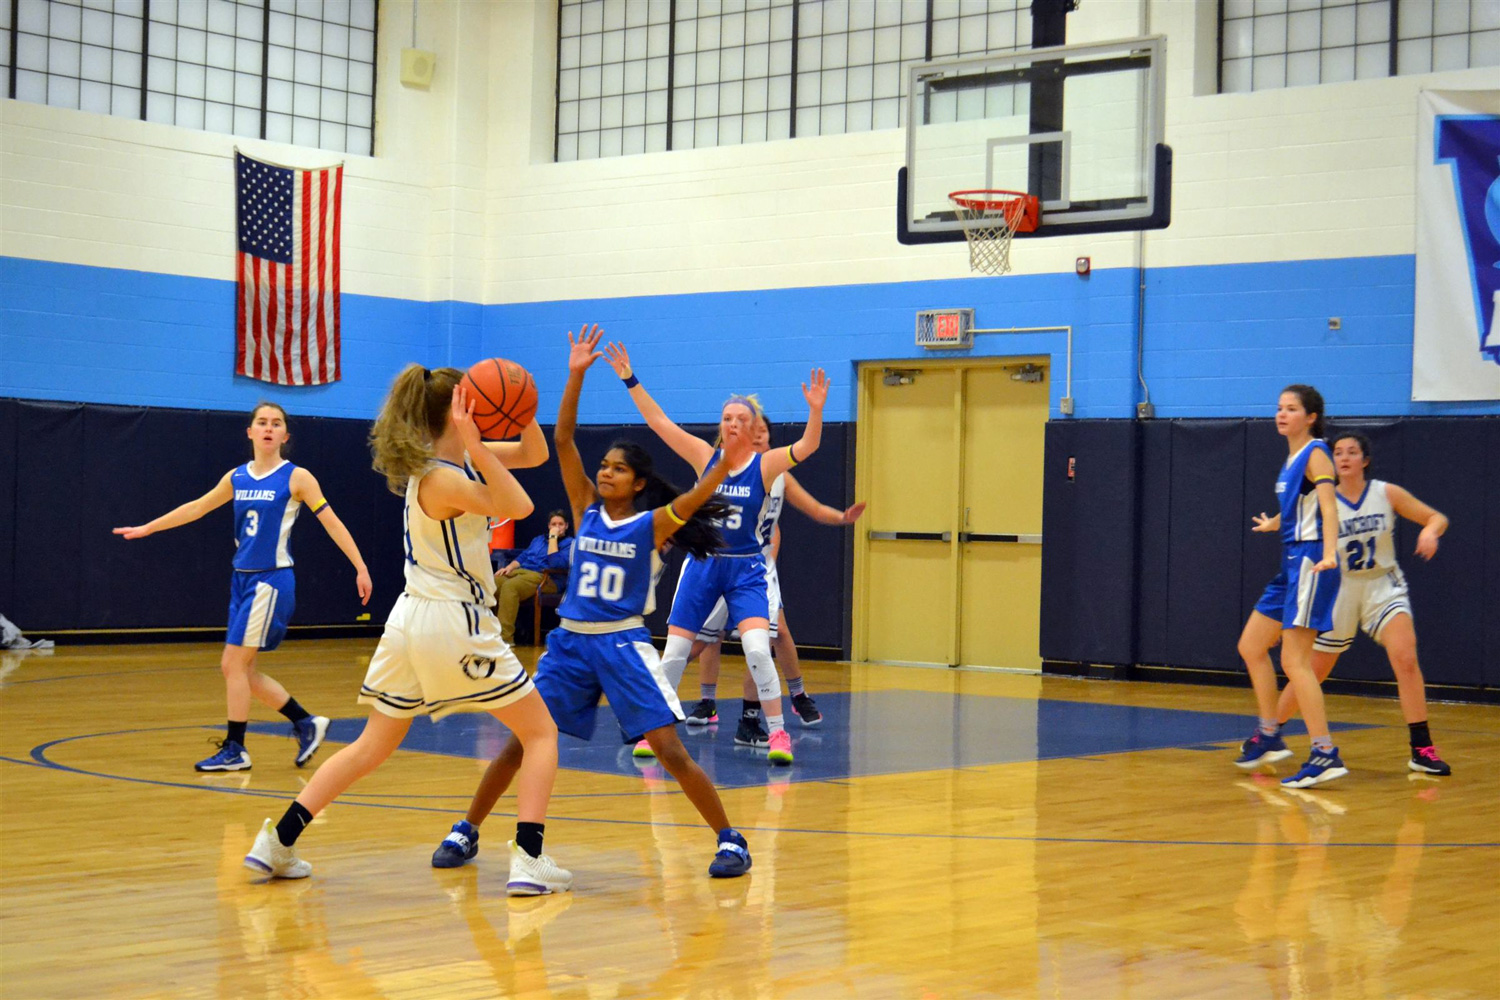 girls basketball game with Williams player defending